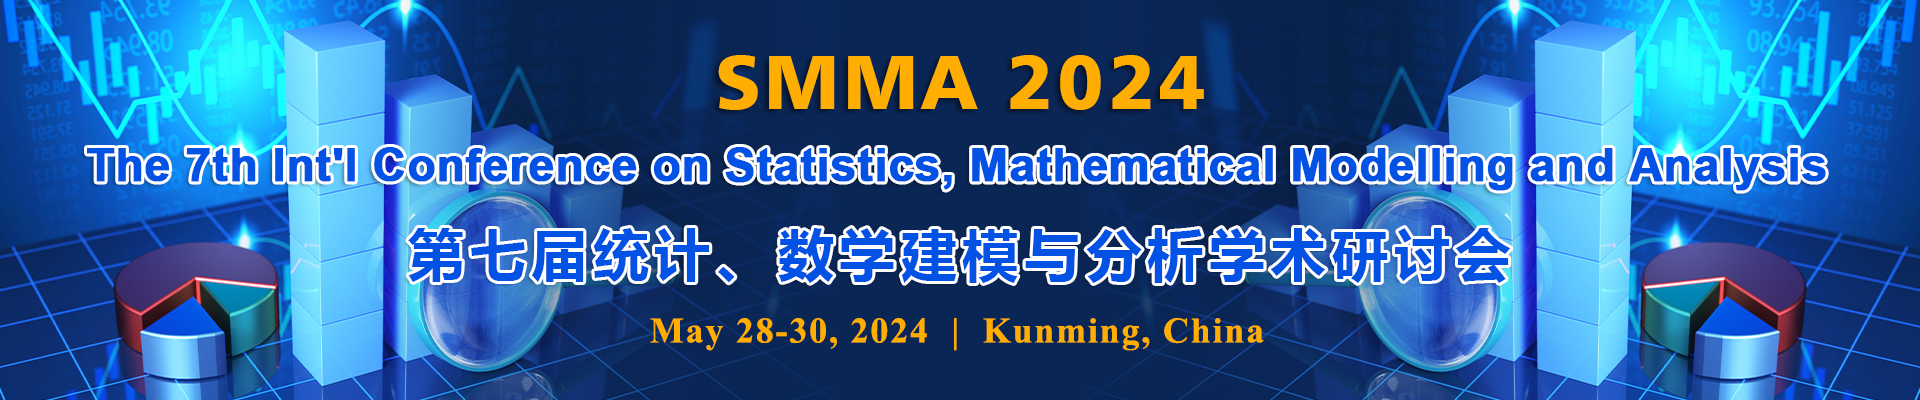 The 7th Int'l Conference on Statistics, Mathematical Modelling and Analysis (SMMA 2024), Kunming, Yunnan, China